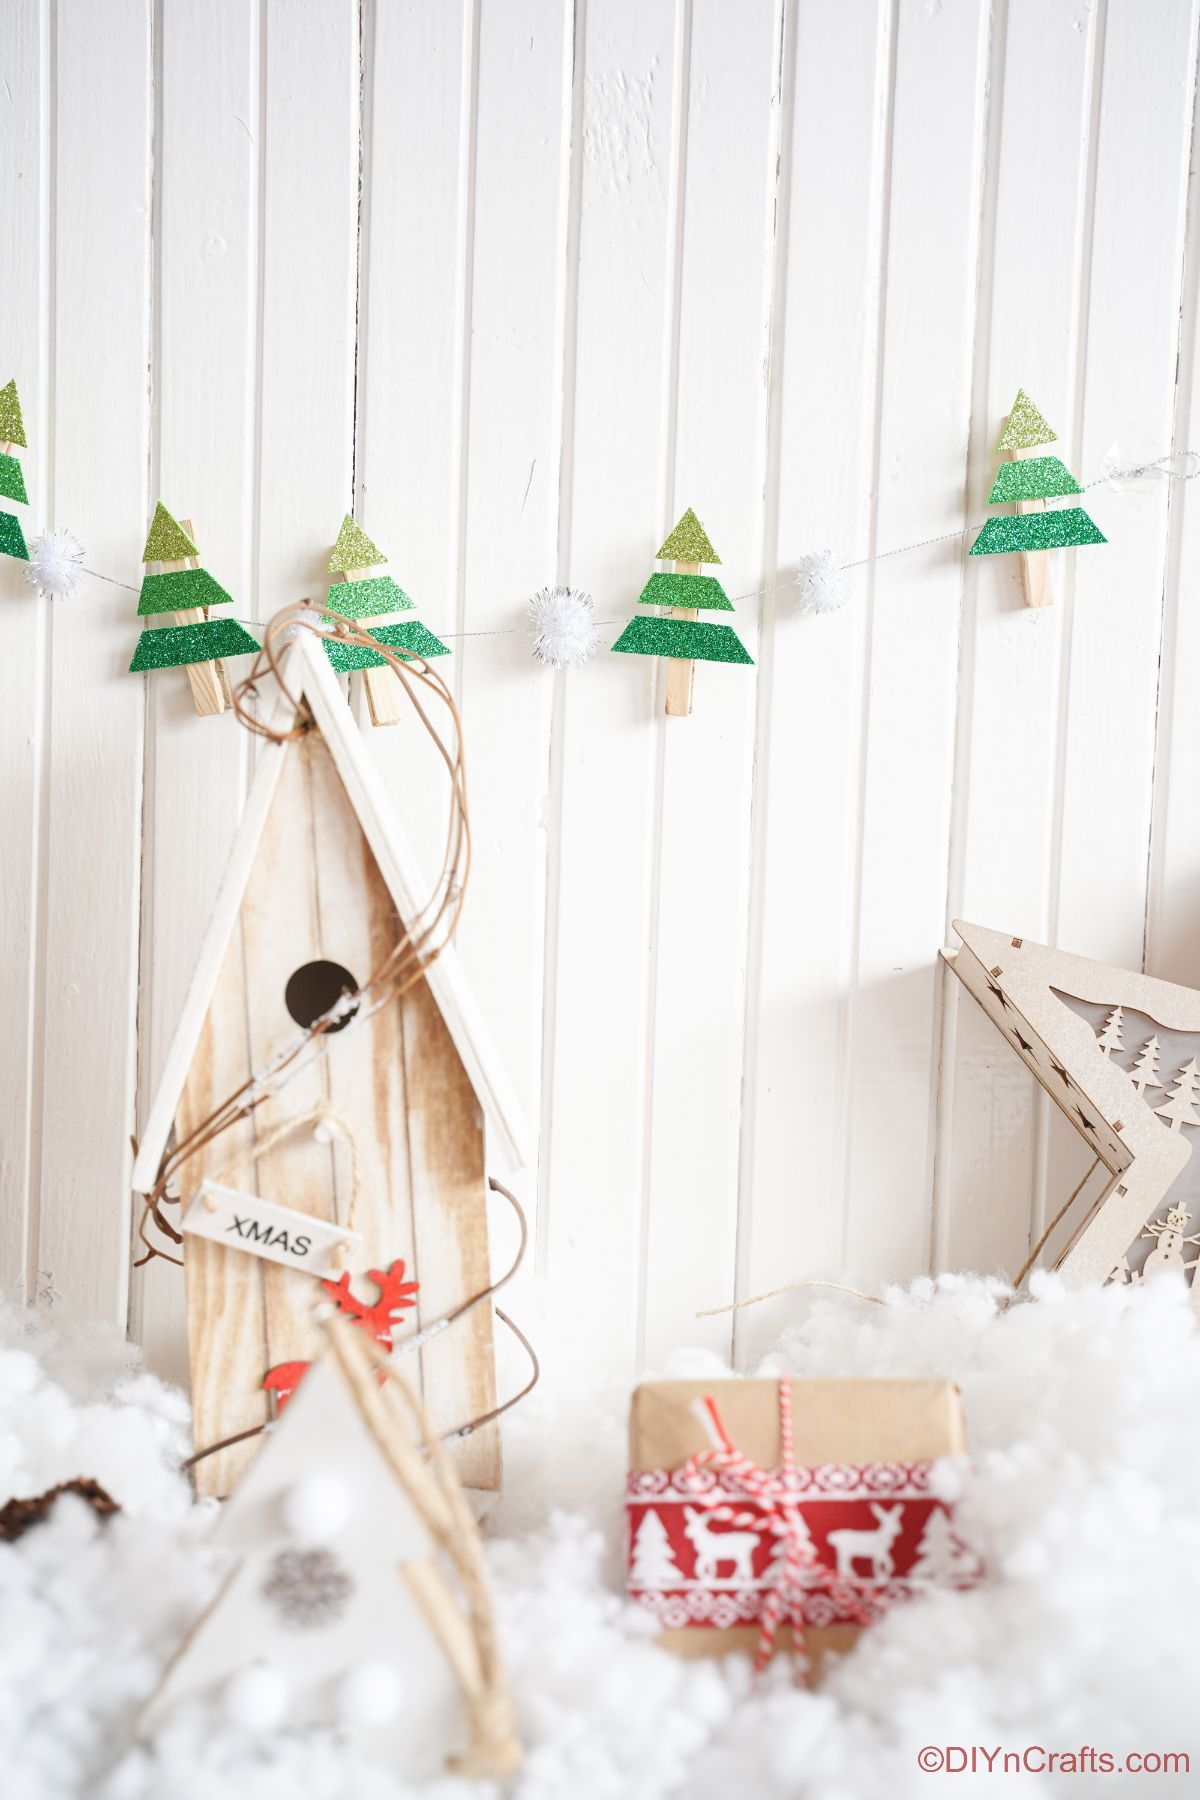 mini tree garland hanging on white wall above holiday decor and fake snow